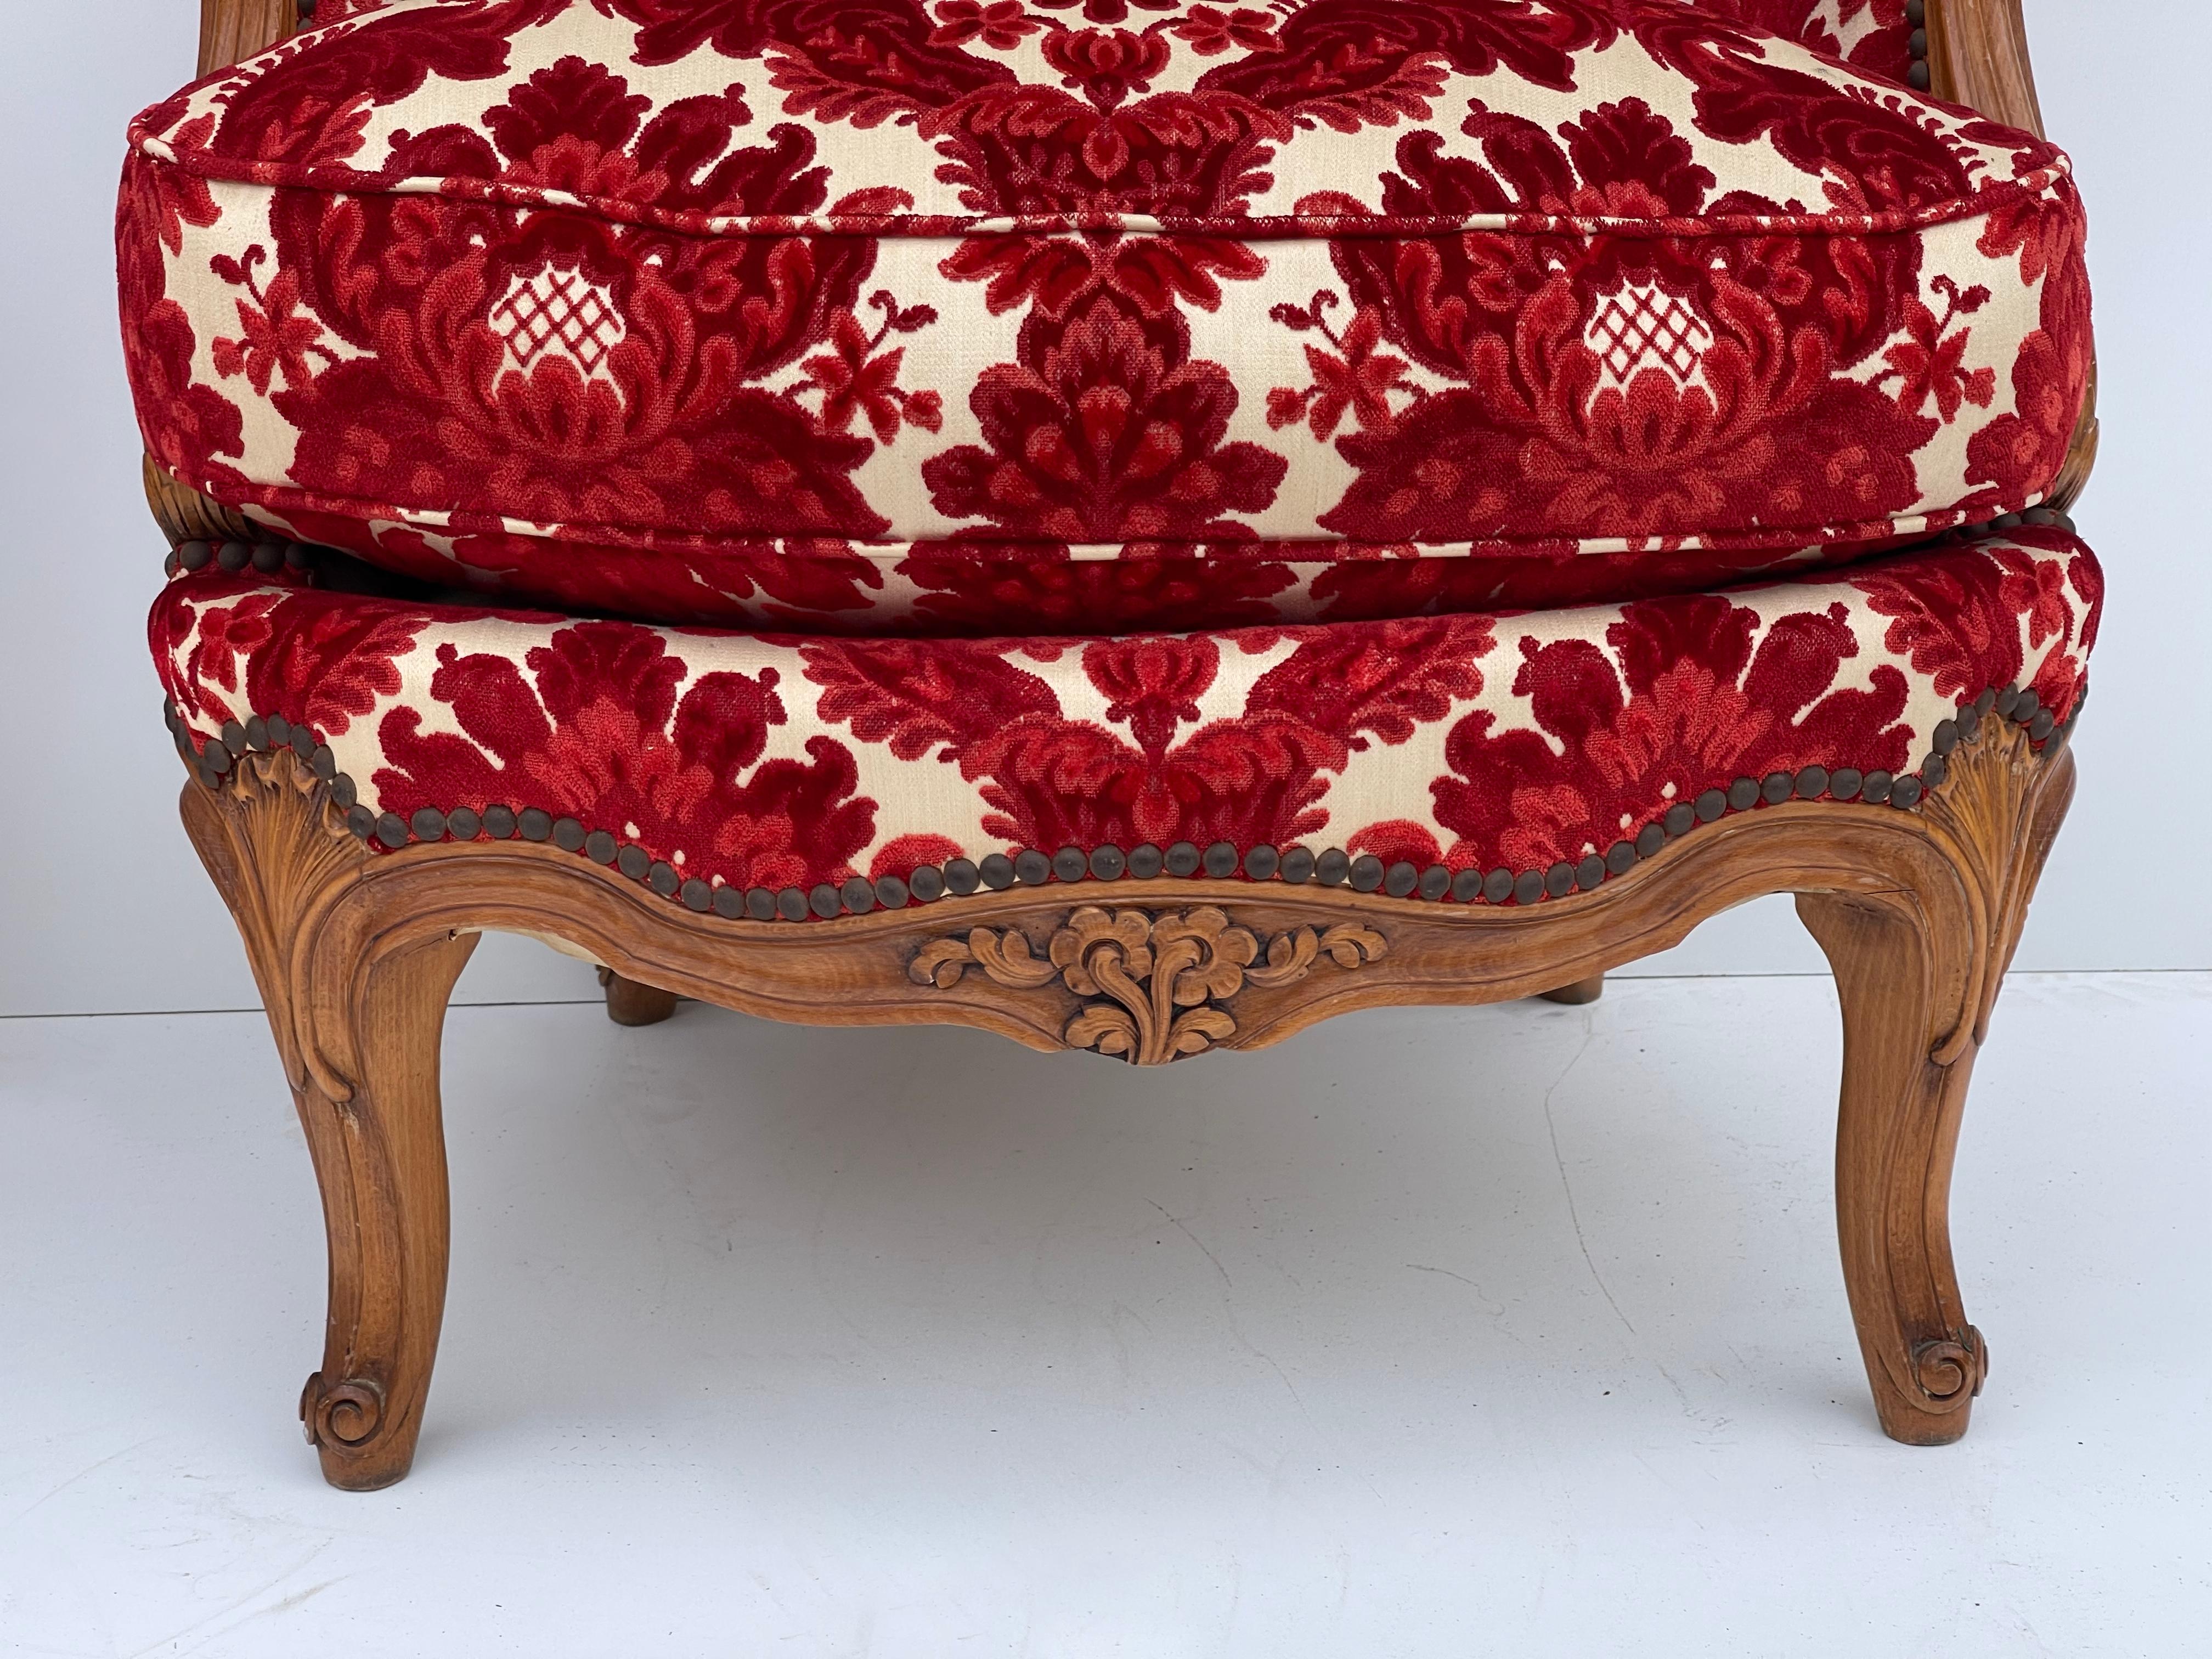 1930s French Carved Fruitwood Chairs in Red Cut Velvet Damask, Pair 3